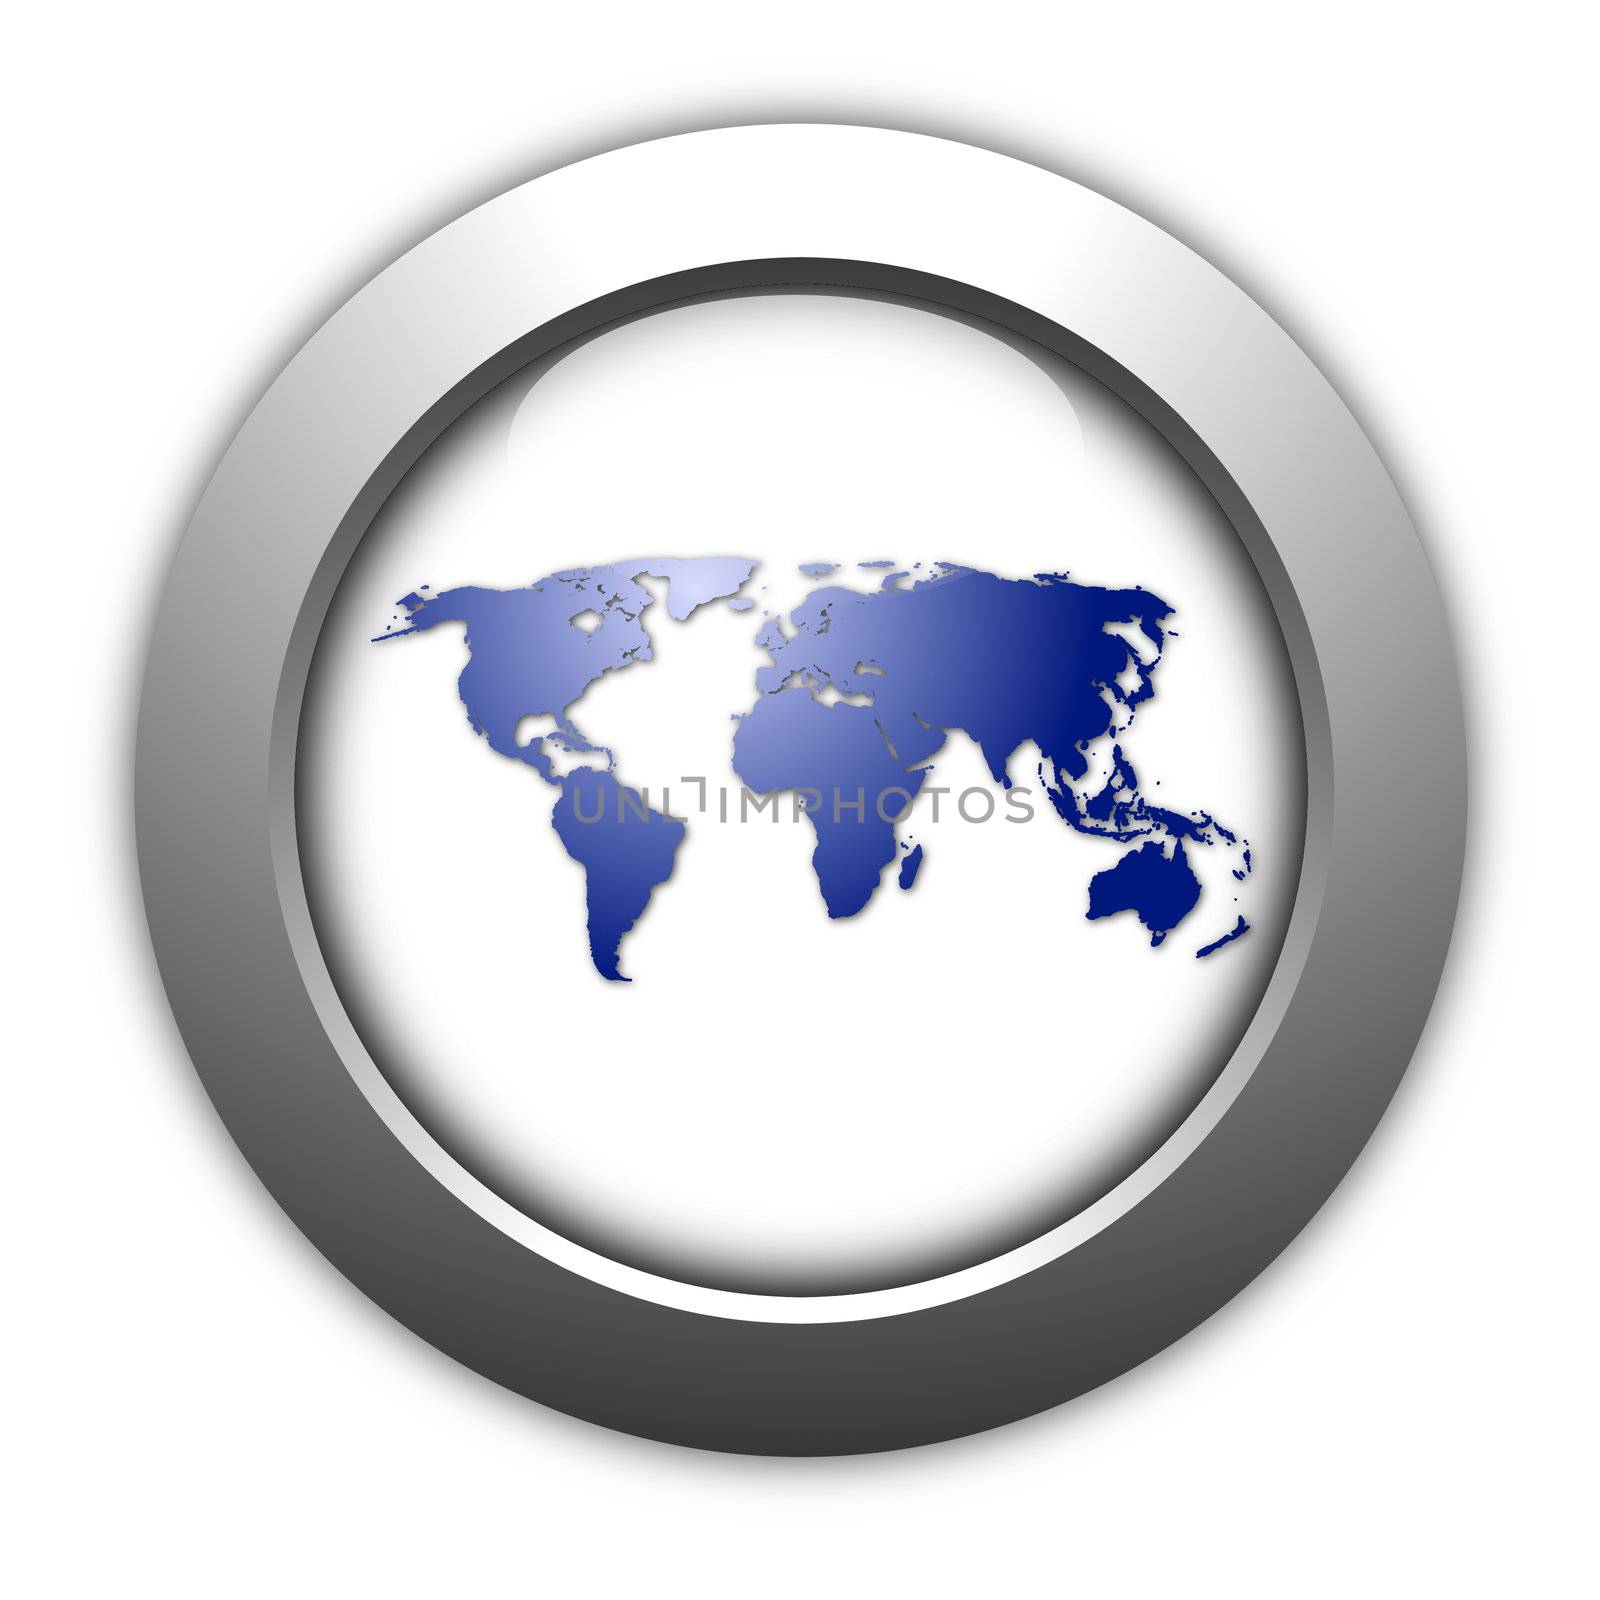 globe or world map in a button illustration